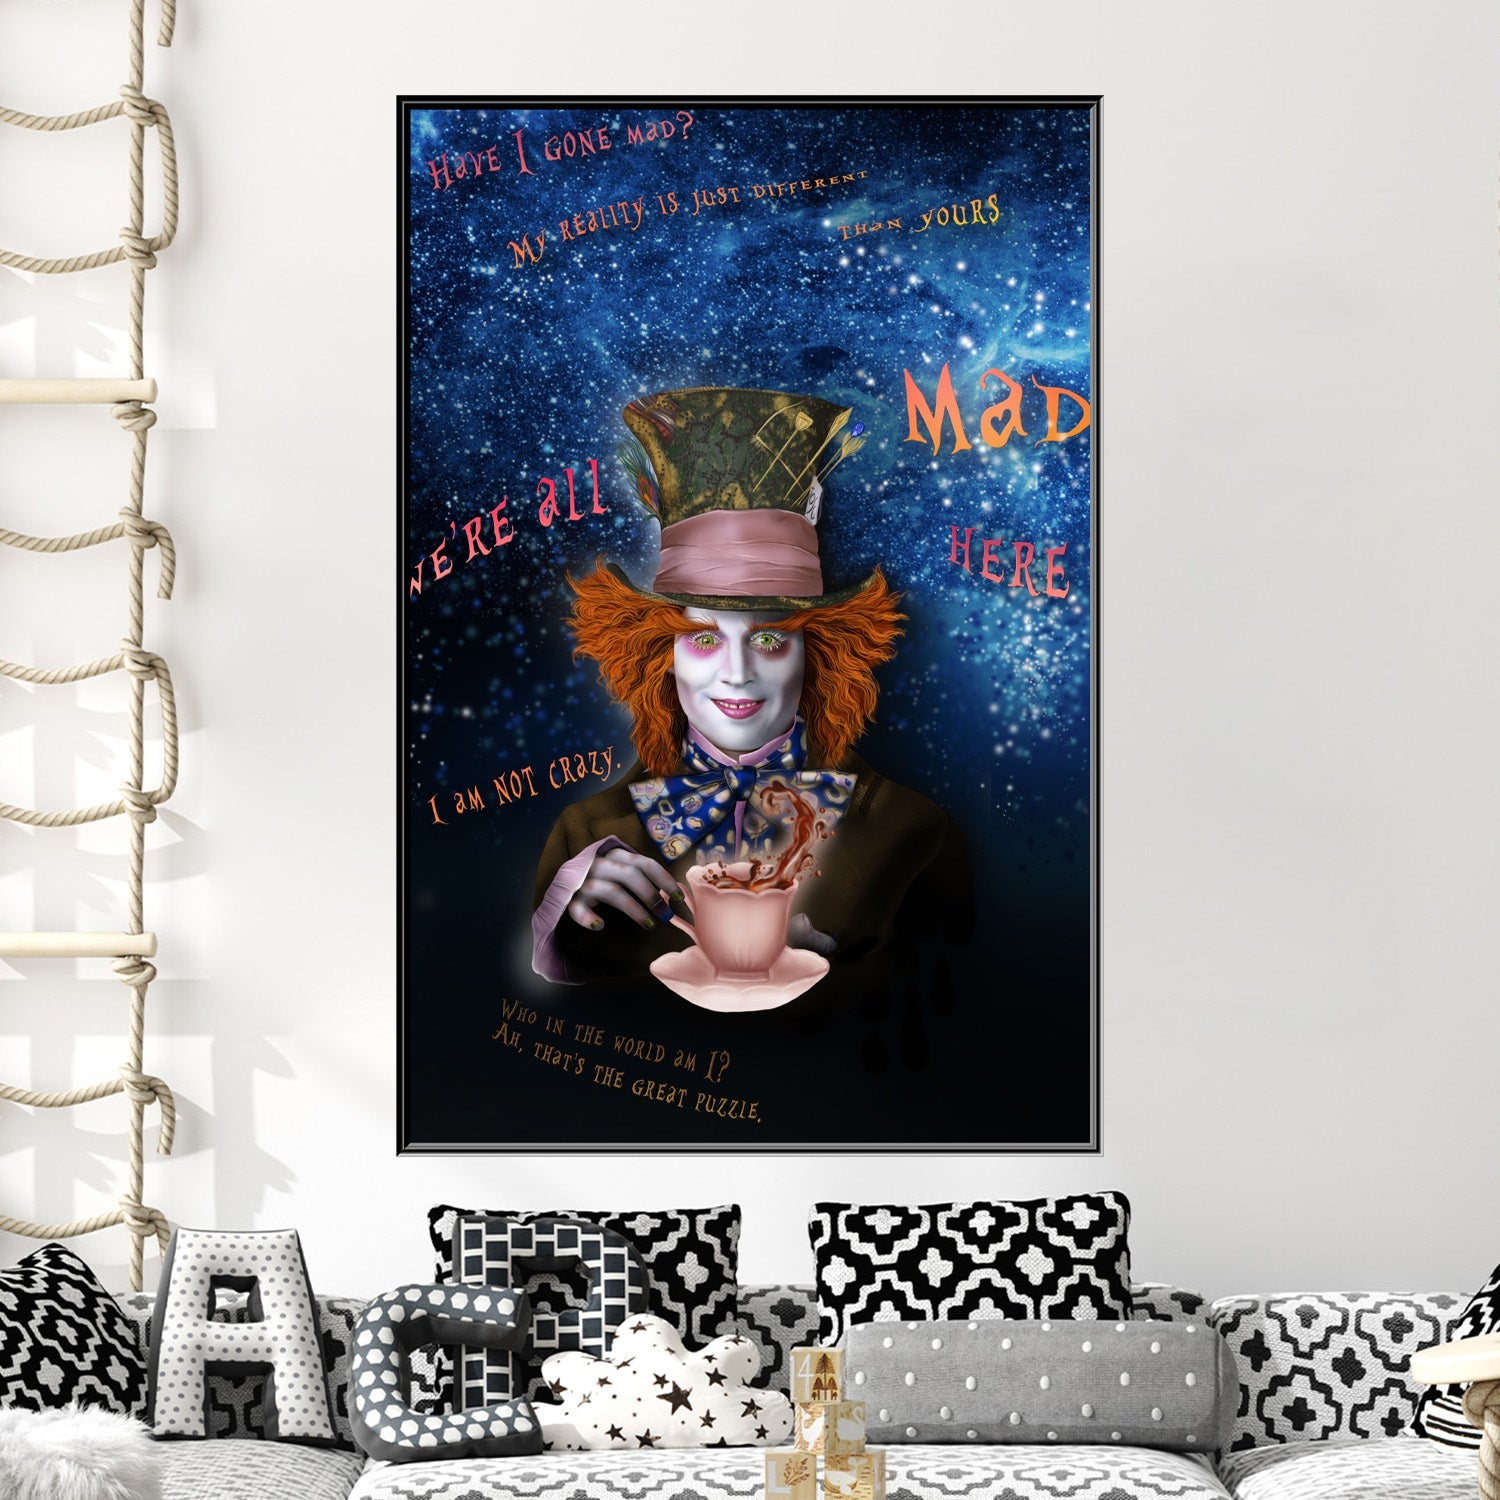 https://cdn.shopify.com/s/files/1/0387/9986/8044/products/TheMadHatterCanvasArtprintStretched-3.jpg